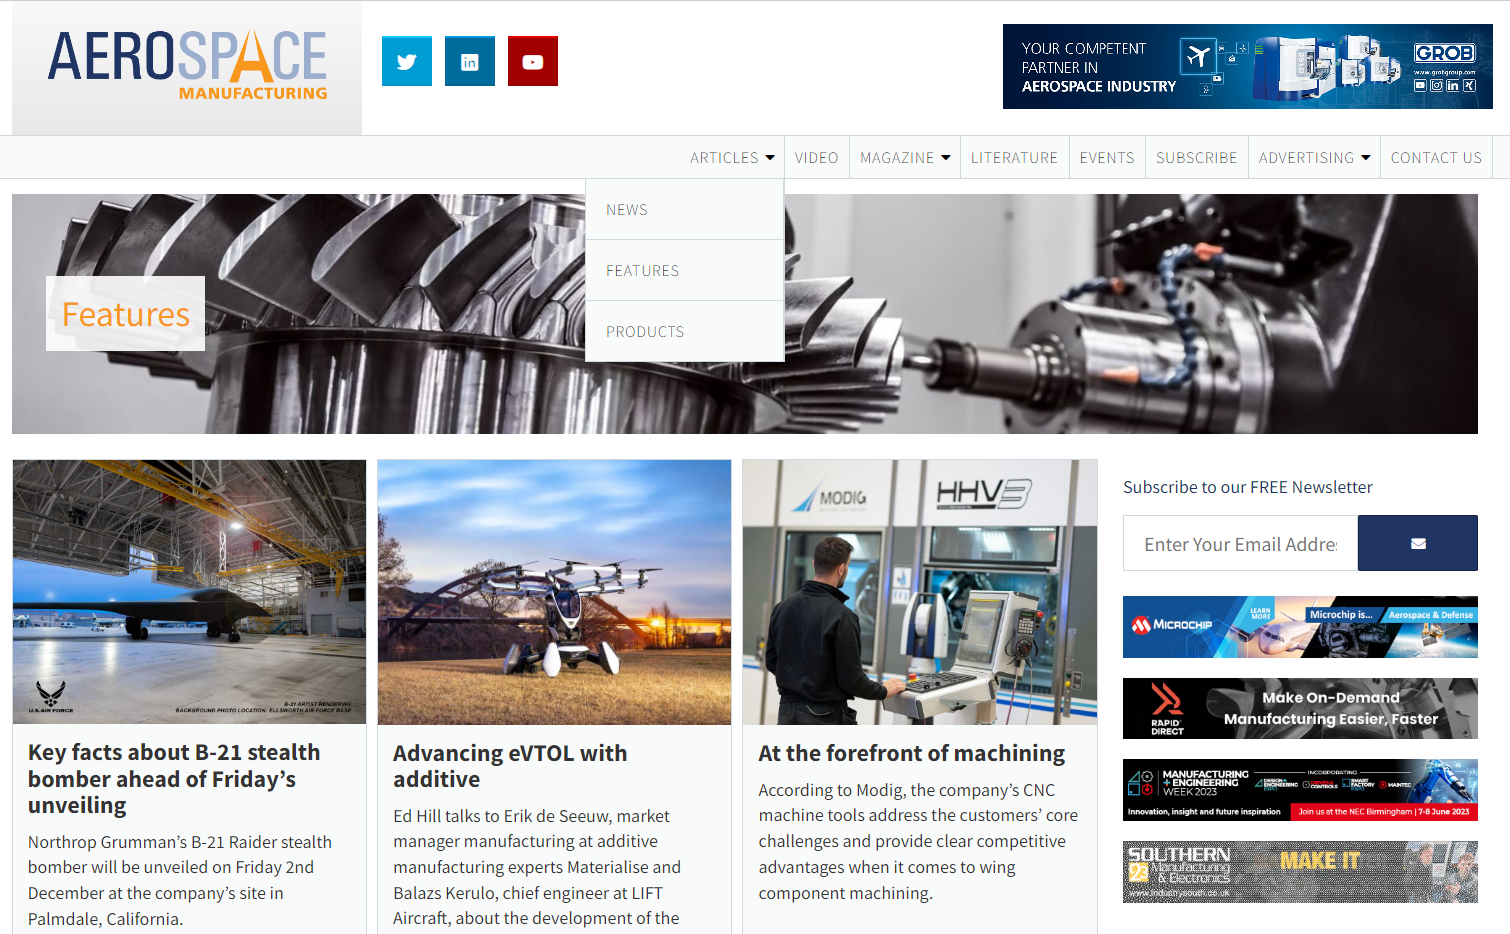 The Aerospace Manufacturing blog presents articles on industry-related news, features, and products